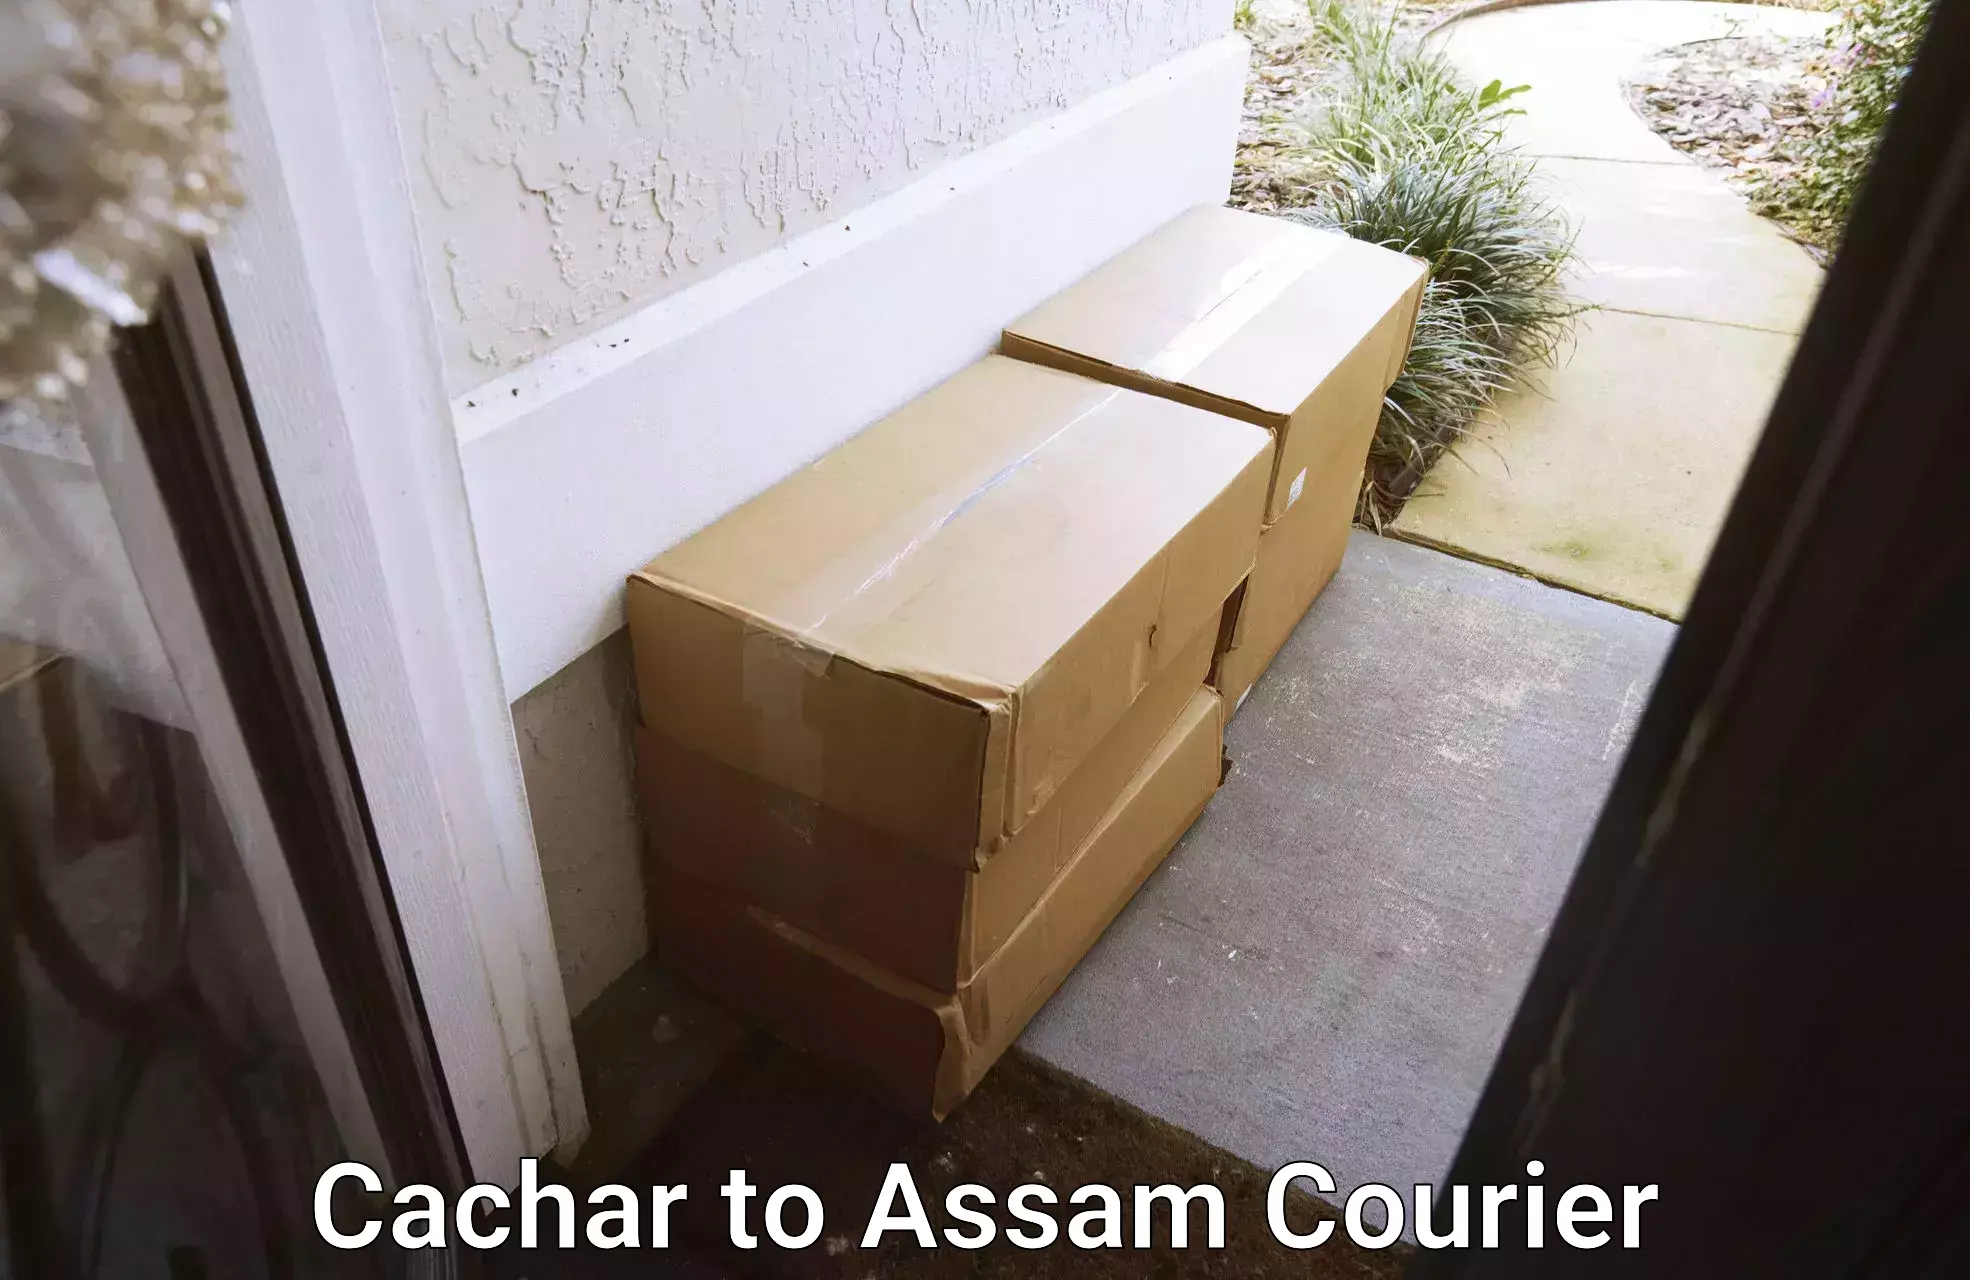 Professional courier services Cachar to Silchar